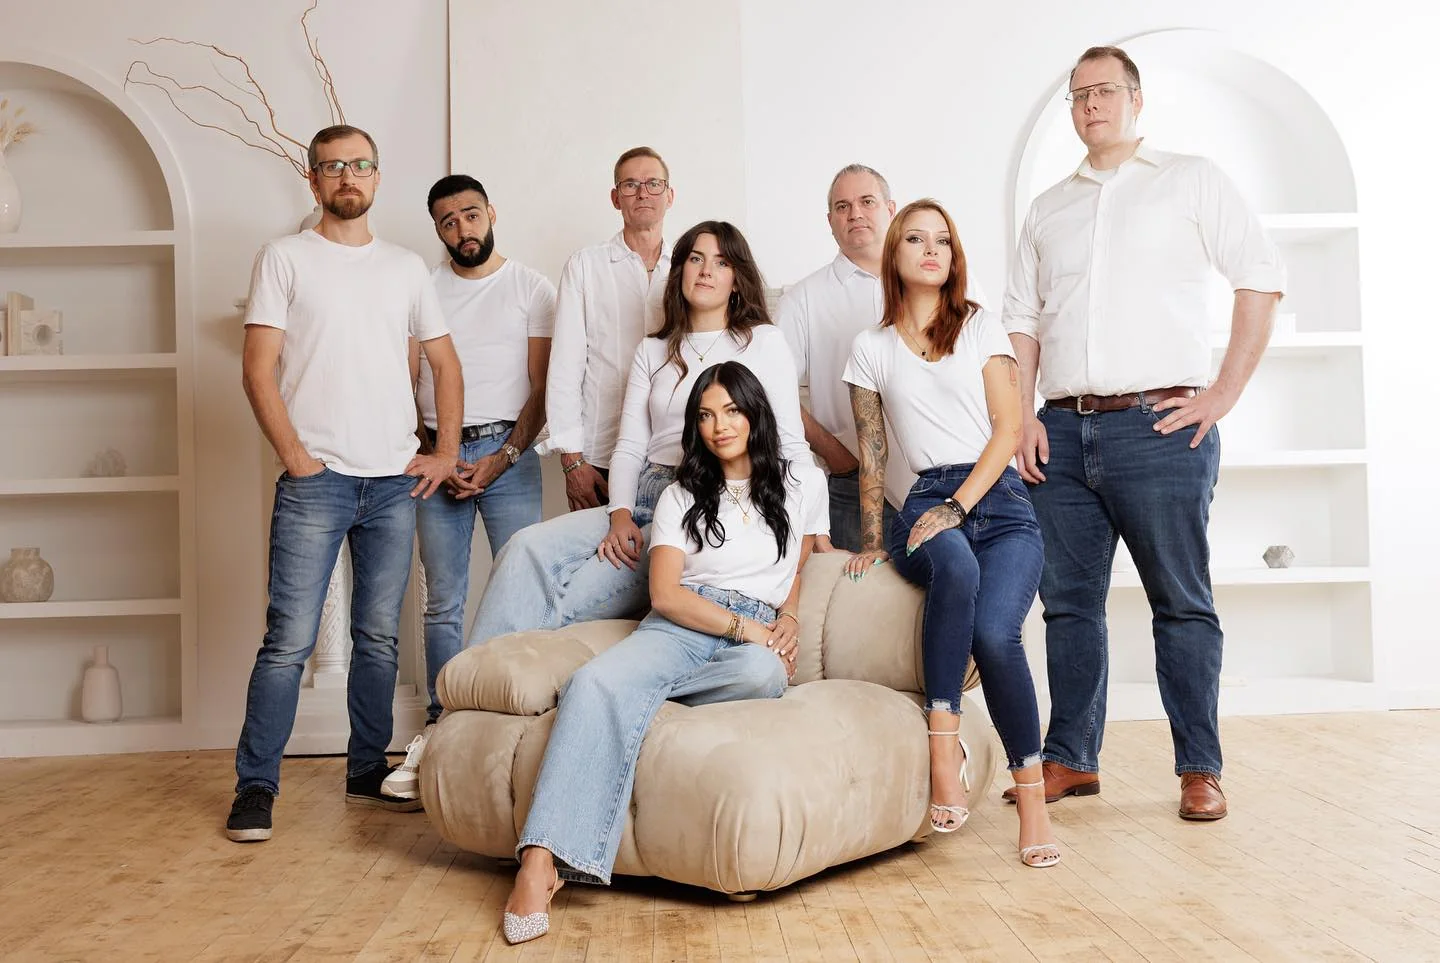 Group of eight diverse adults in white shirts and jeans, posing in the bright office of the best property management company, with one woman seated on a beige bean bag.